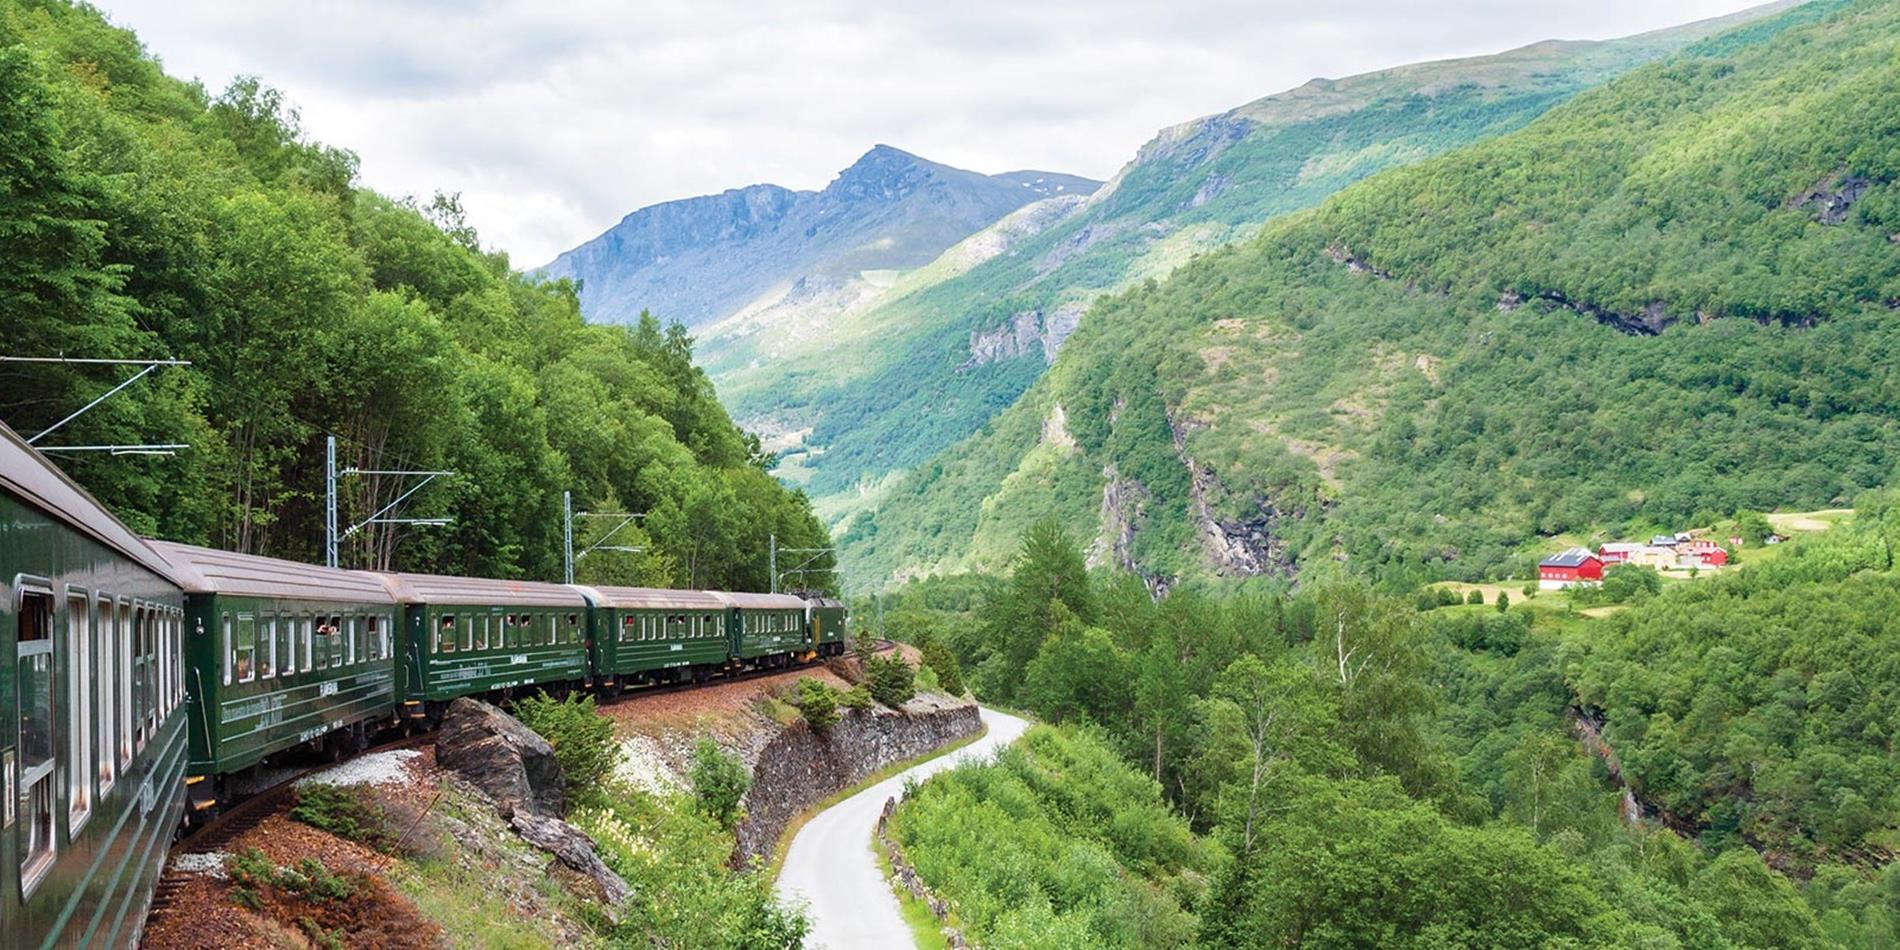 View of train traveling alongside a mountain, Norway